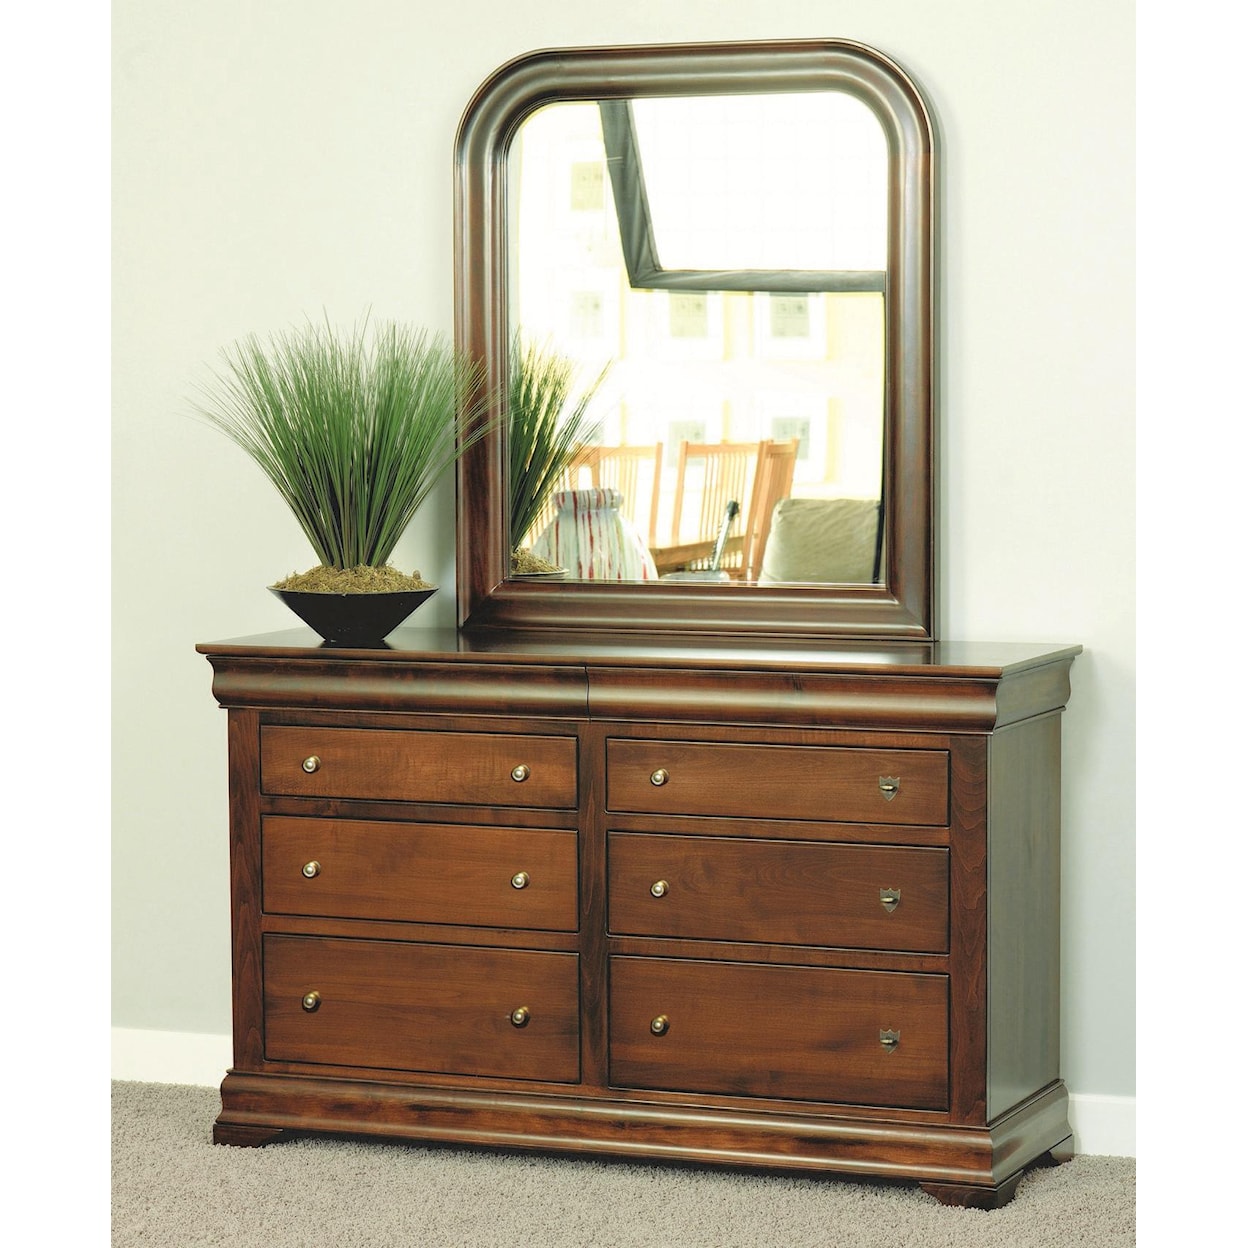 The Urban Collection Bordeaux Six Drawer Dresser and Rounded Mirror Set